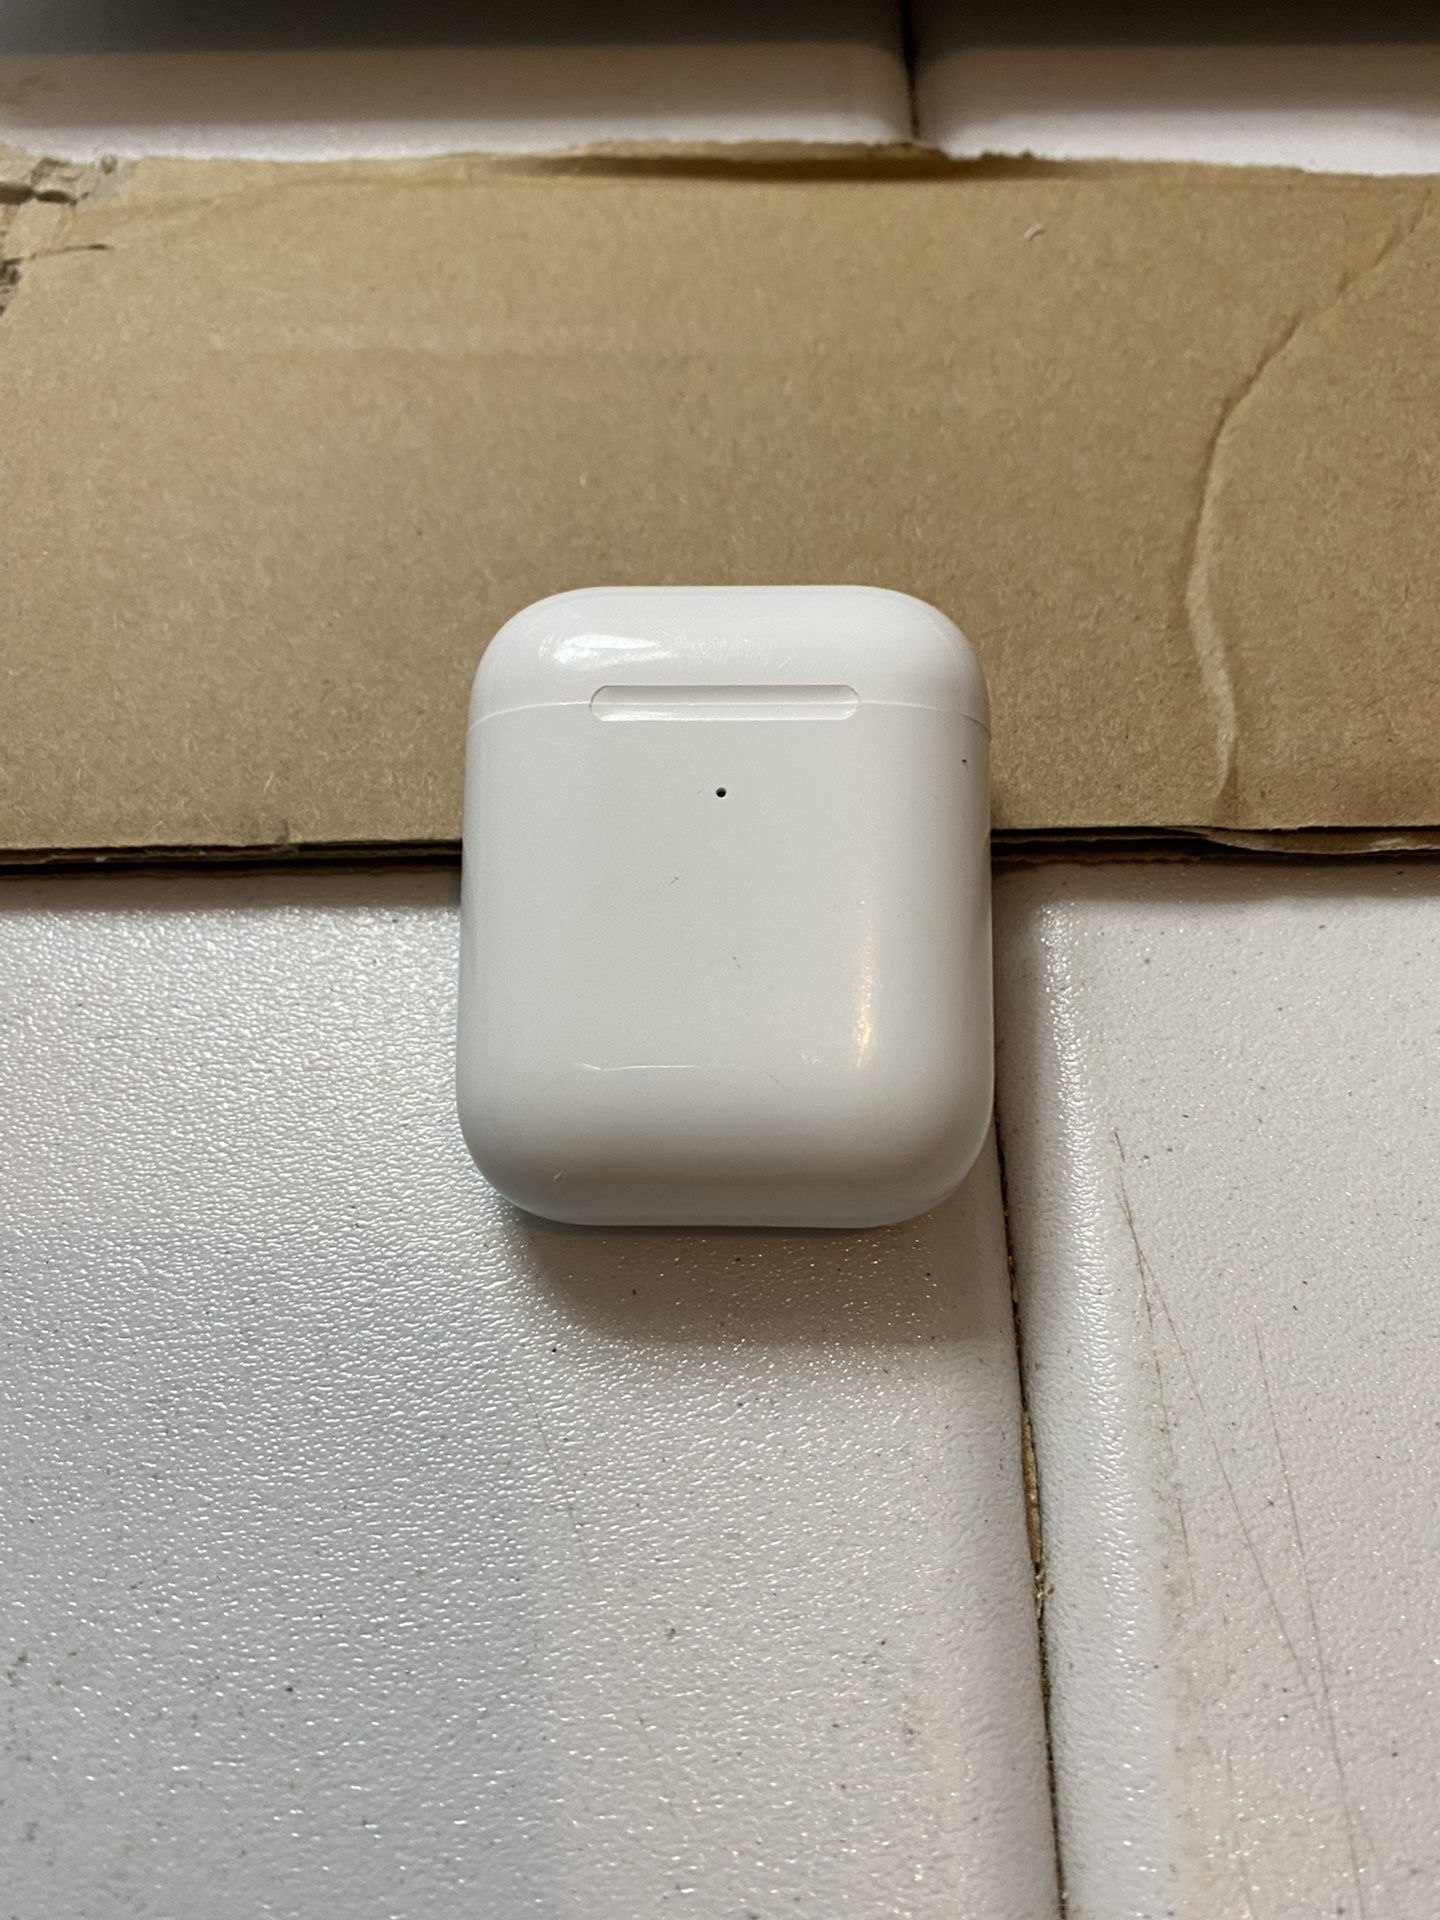 Apple AirPods 1 Or 2 Charger Case Only - No Buds - Just The Case 